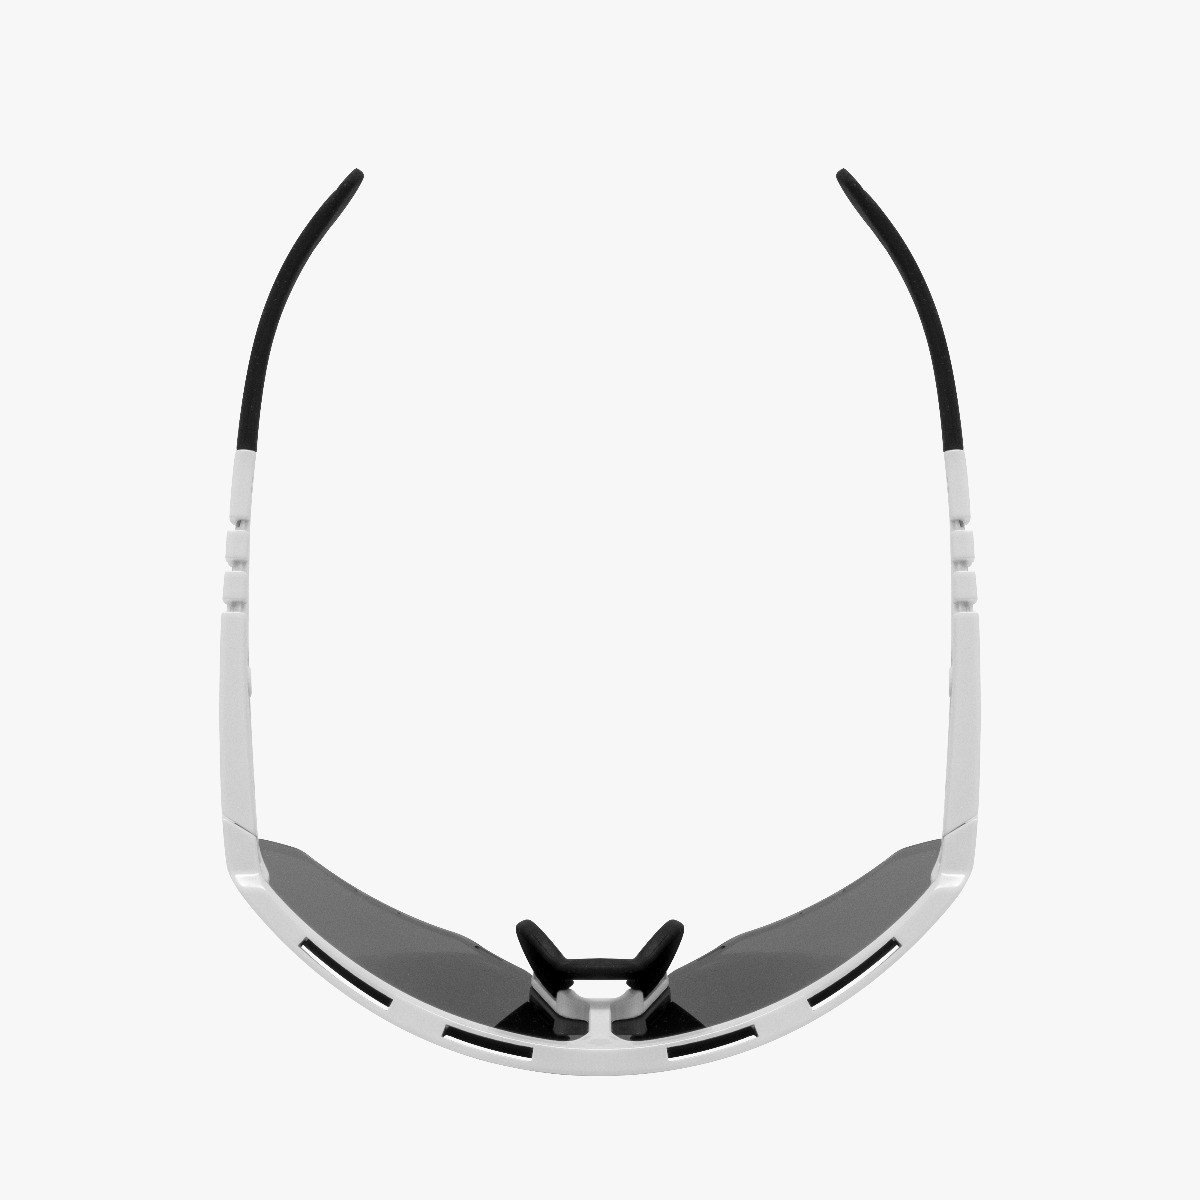 Scicon Sports | Aerowing Sport Performance Sunglasses - White Gloss / Multimirror Silver  - EY26080802